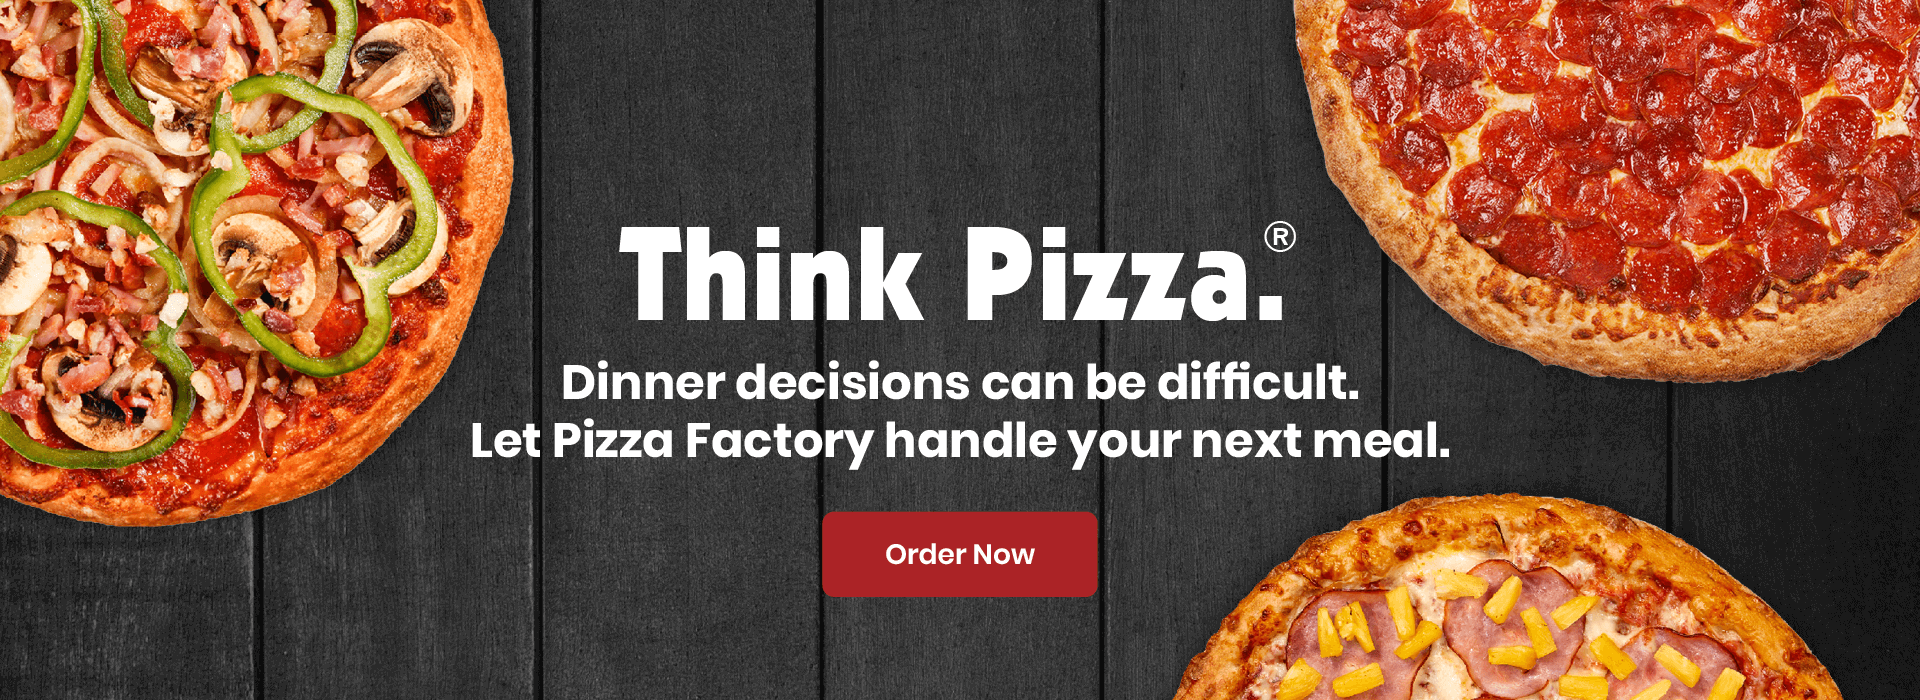 Let Pizza Factory handle your next meal. Order now.